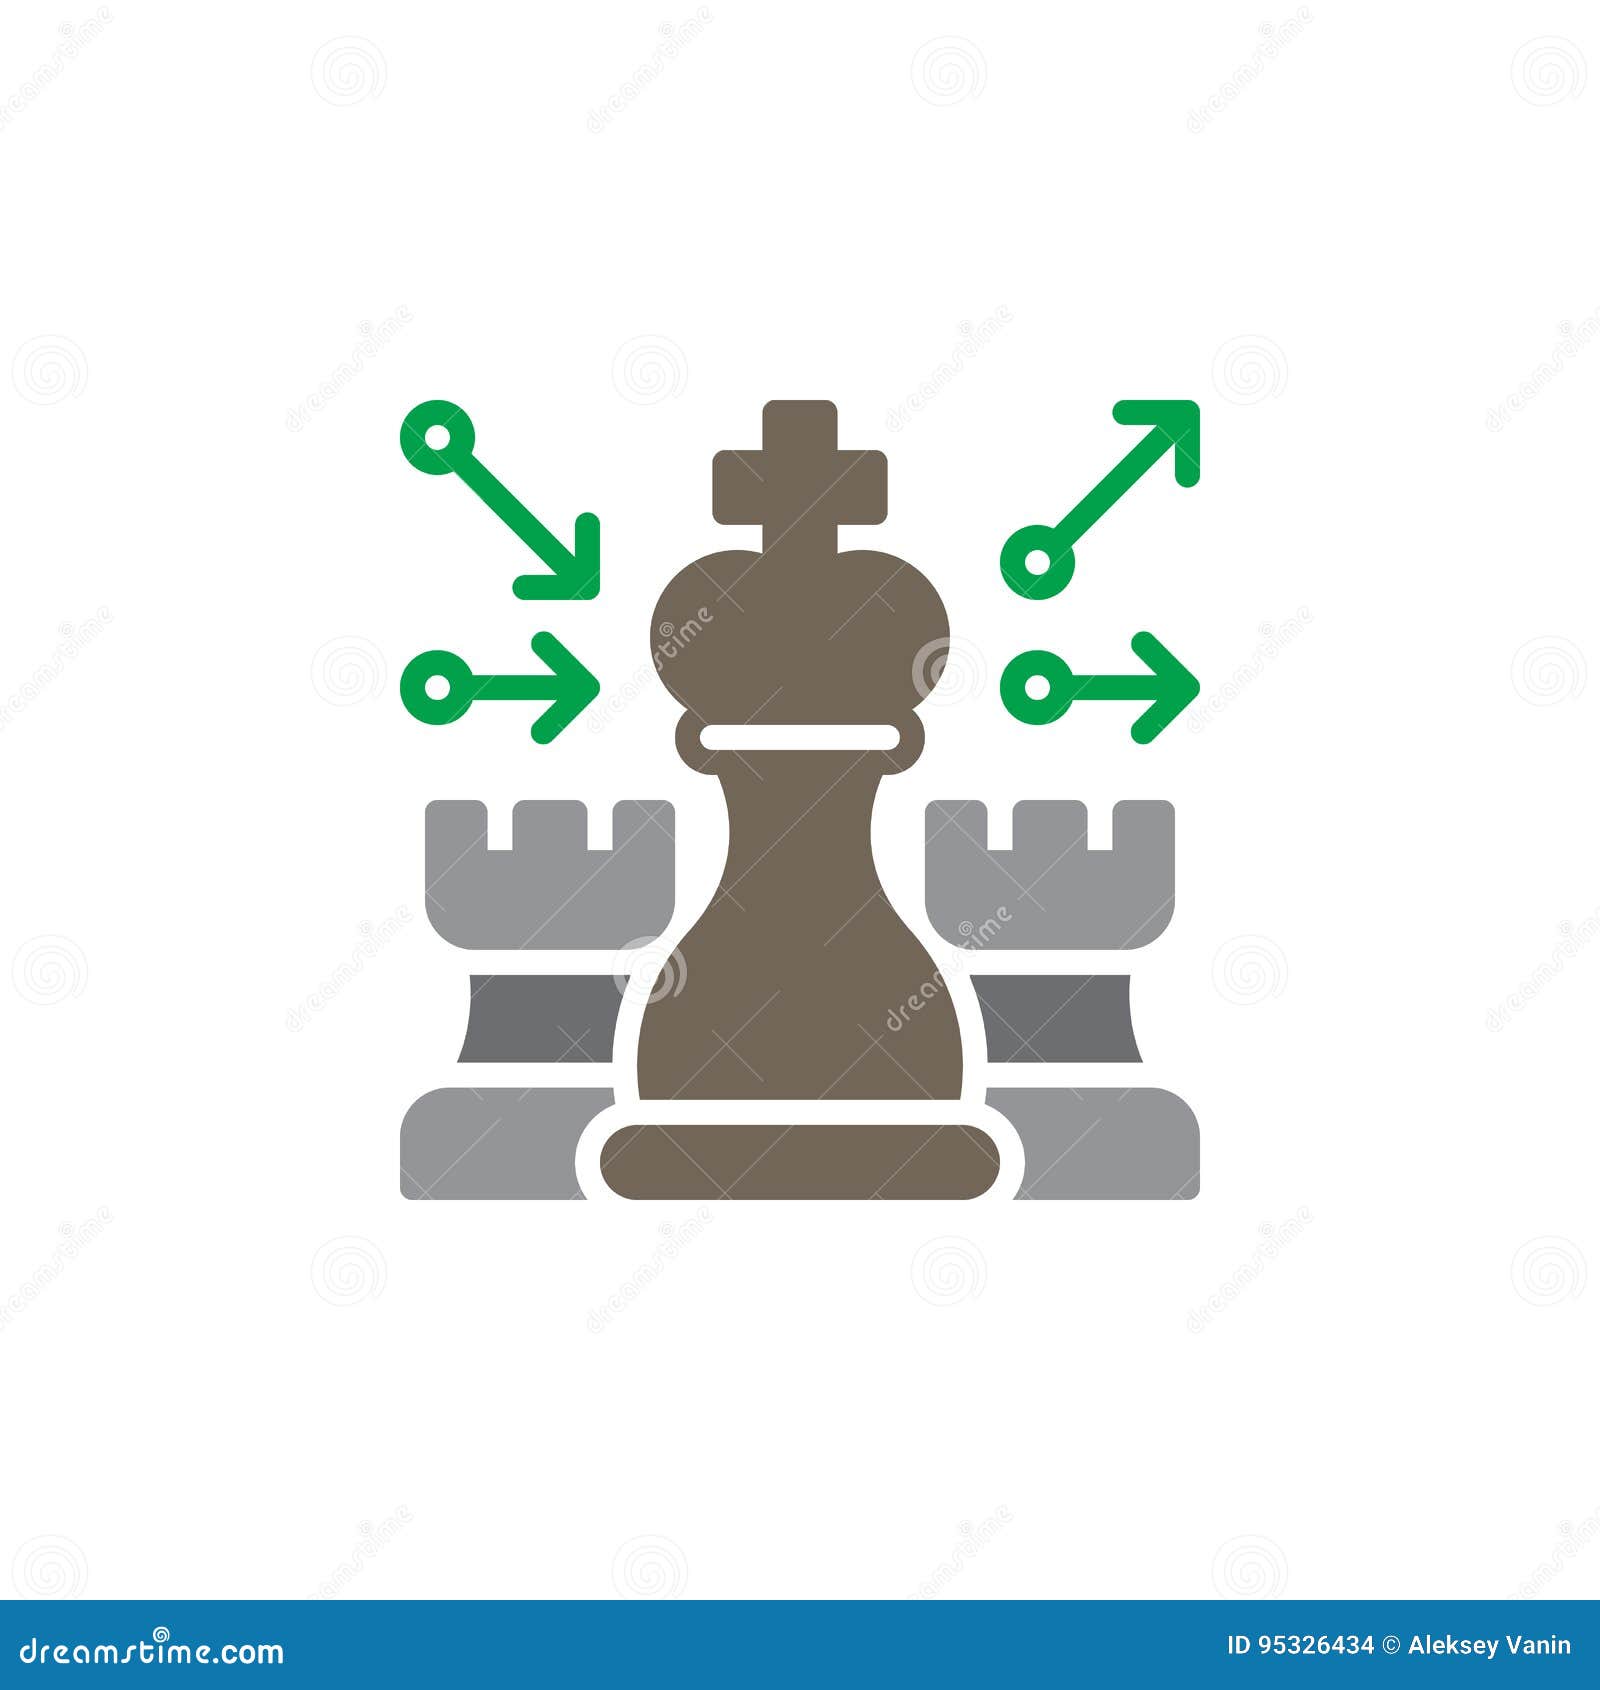 graphic, chess, Analysis, Business, line, strategy, set icon